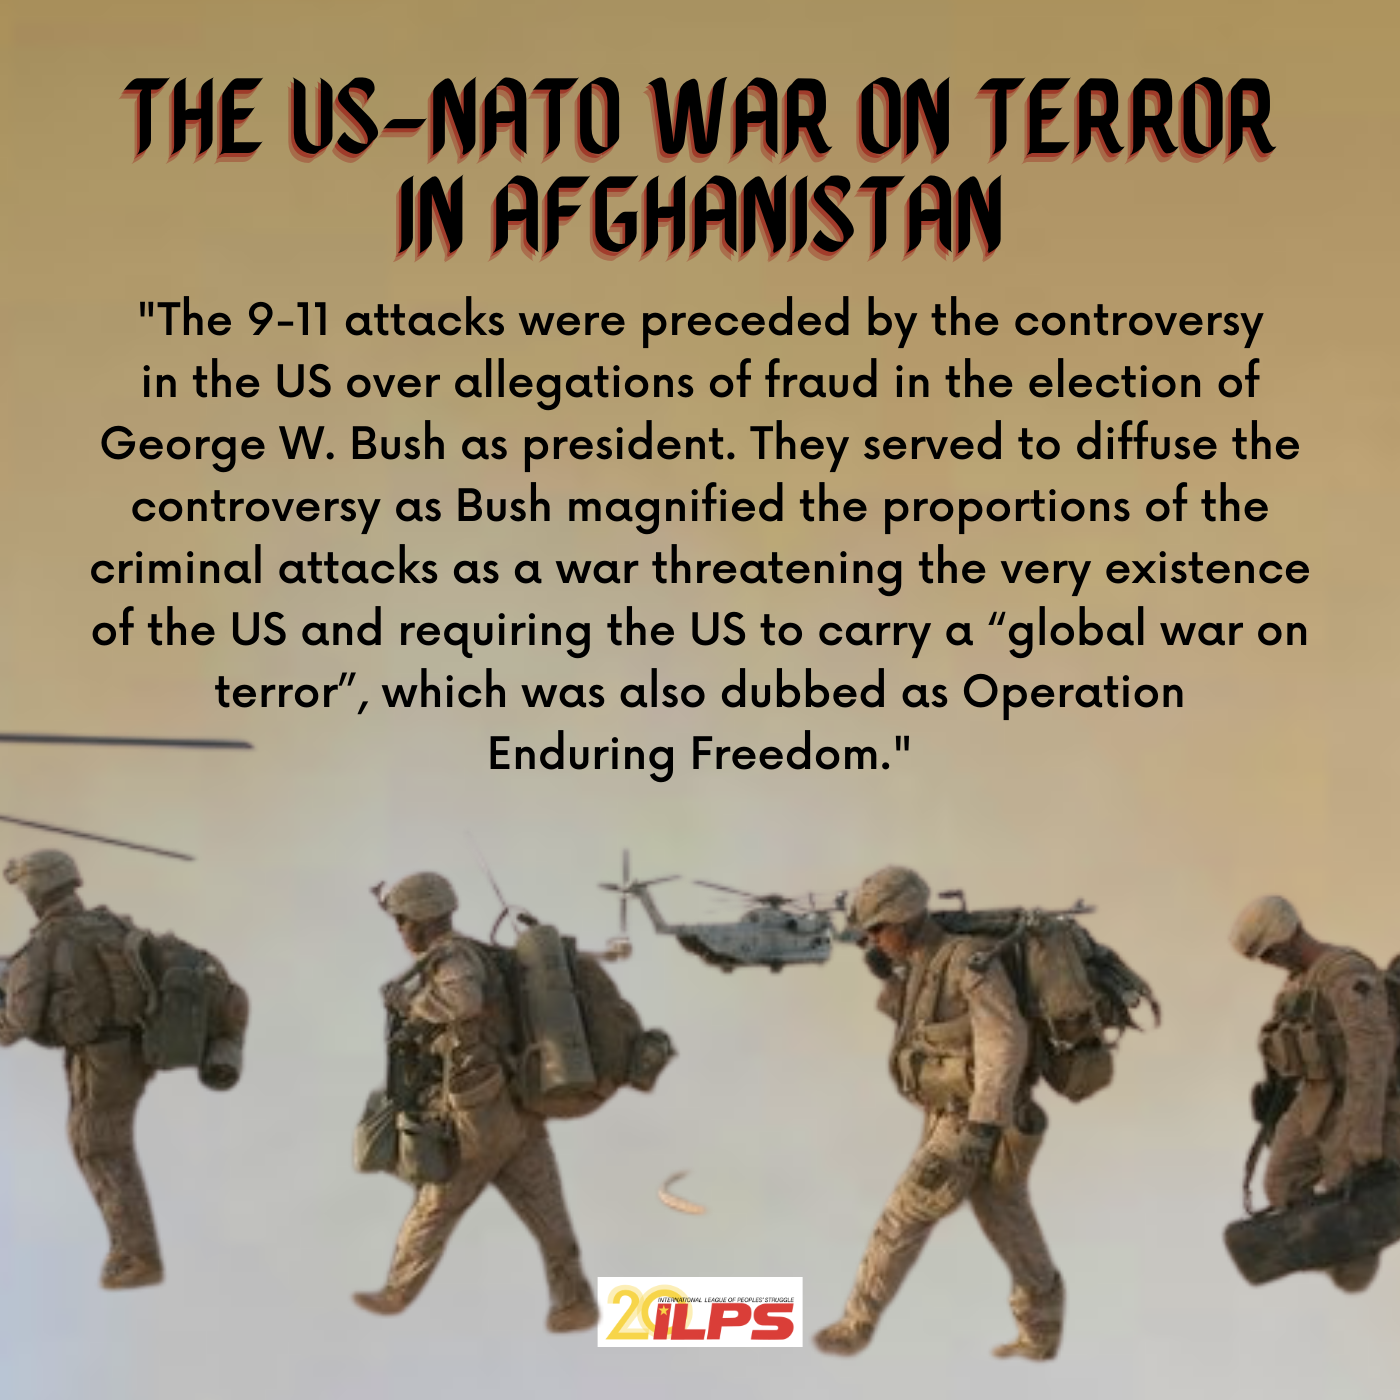 THE US-NATO WAR ON TERROR IN AFGHANISTAN